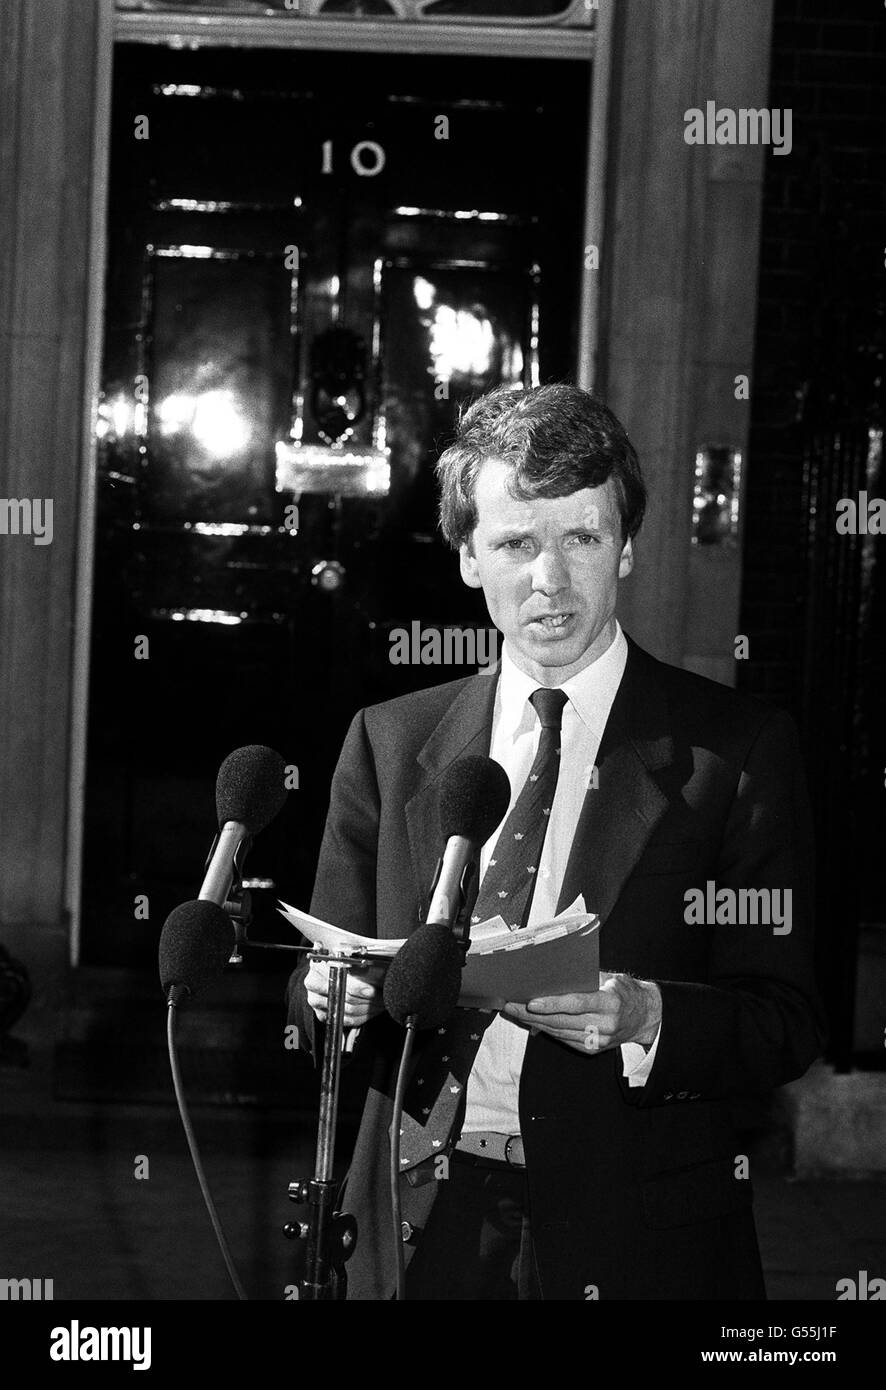 PA PHOTO 6/7/1988 SPORTS MINISTER, COLIN MOYNIHAN ANNOUNCING THE GOVERNMENT'S INTENTION TO INTRODUCE LEGISLATION FORCING 92 FOOTBALL LEAGUE CLUBS TO BRING IN A NATIONWIDE MEMBERSHIP CARD SCHEME, FROM THE DOORSTEPS OF 10 DOWNING STREET, LONDON. Stock Photo